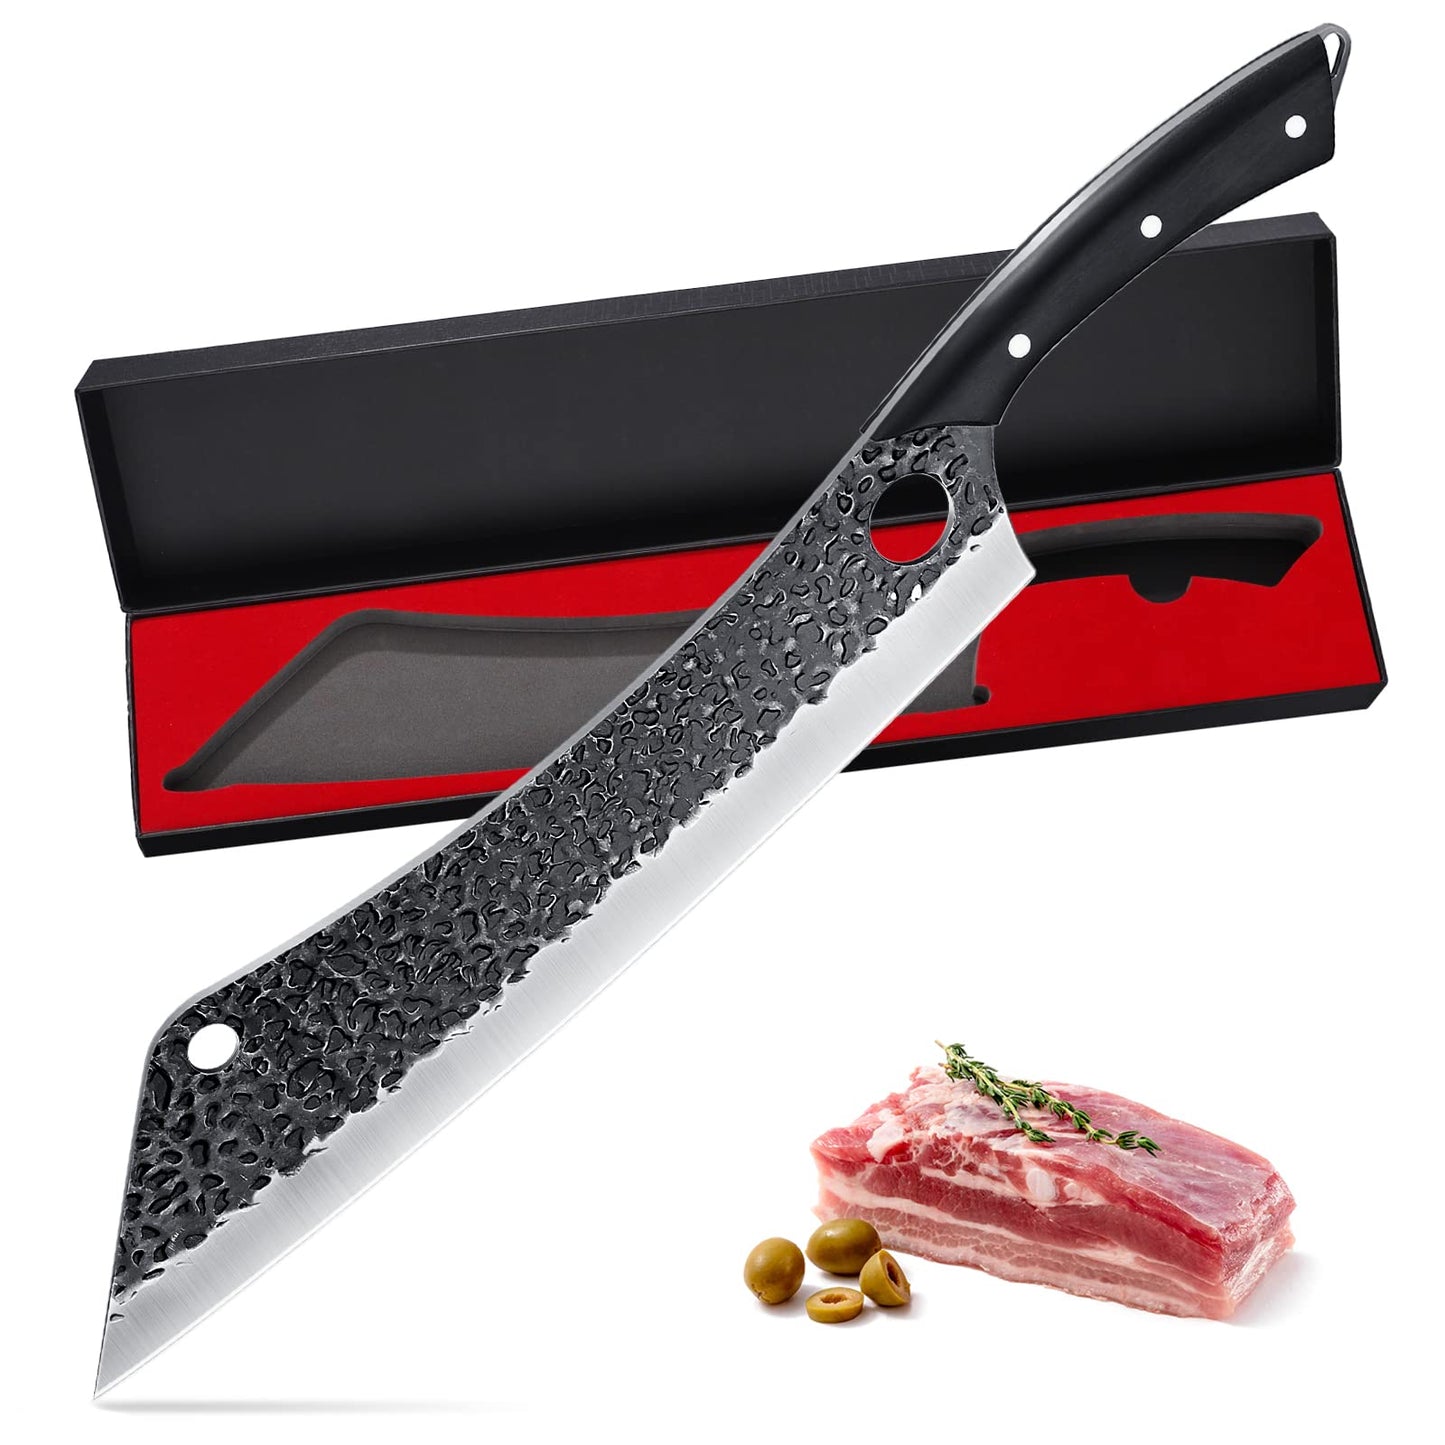 Bright Hobby Stainless Steel Meat Carving Knife - Razor Sharp 12 in Large  Slicer Carving Knife 